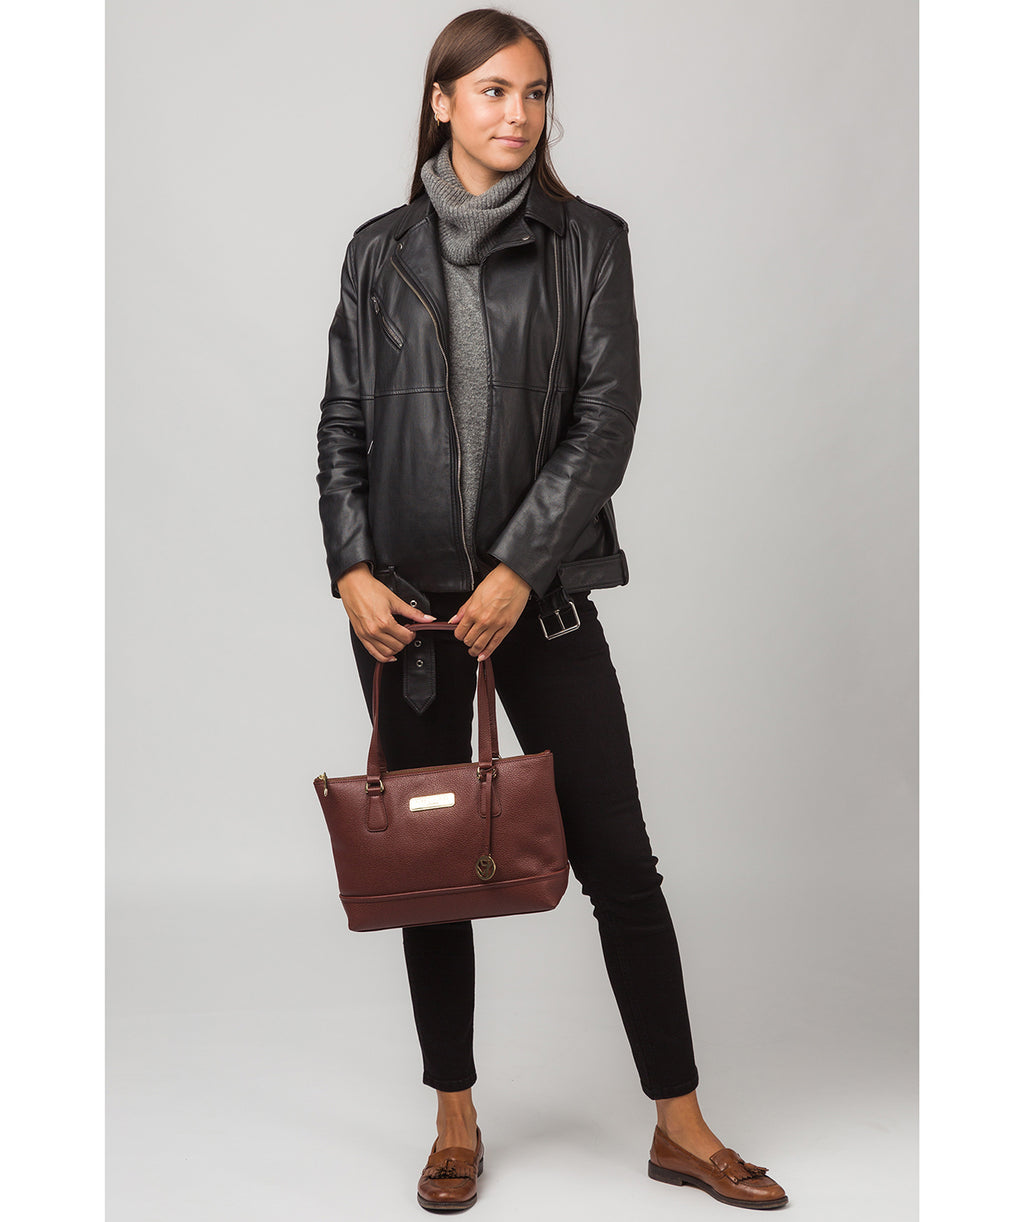 Chestnut Leather Handbag 'Keira' by Pure Luxuries – Pure Luxuries London